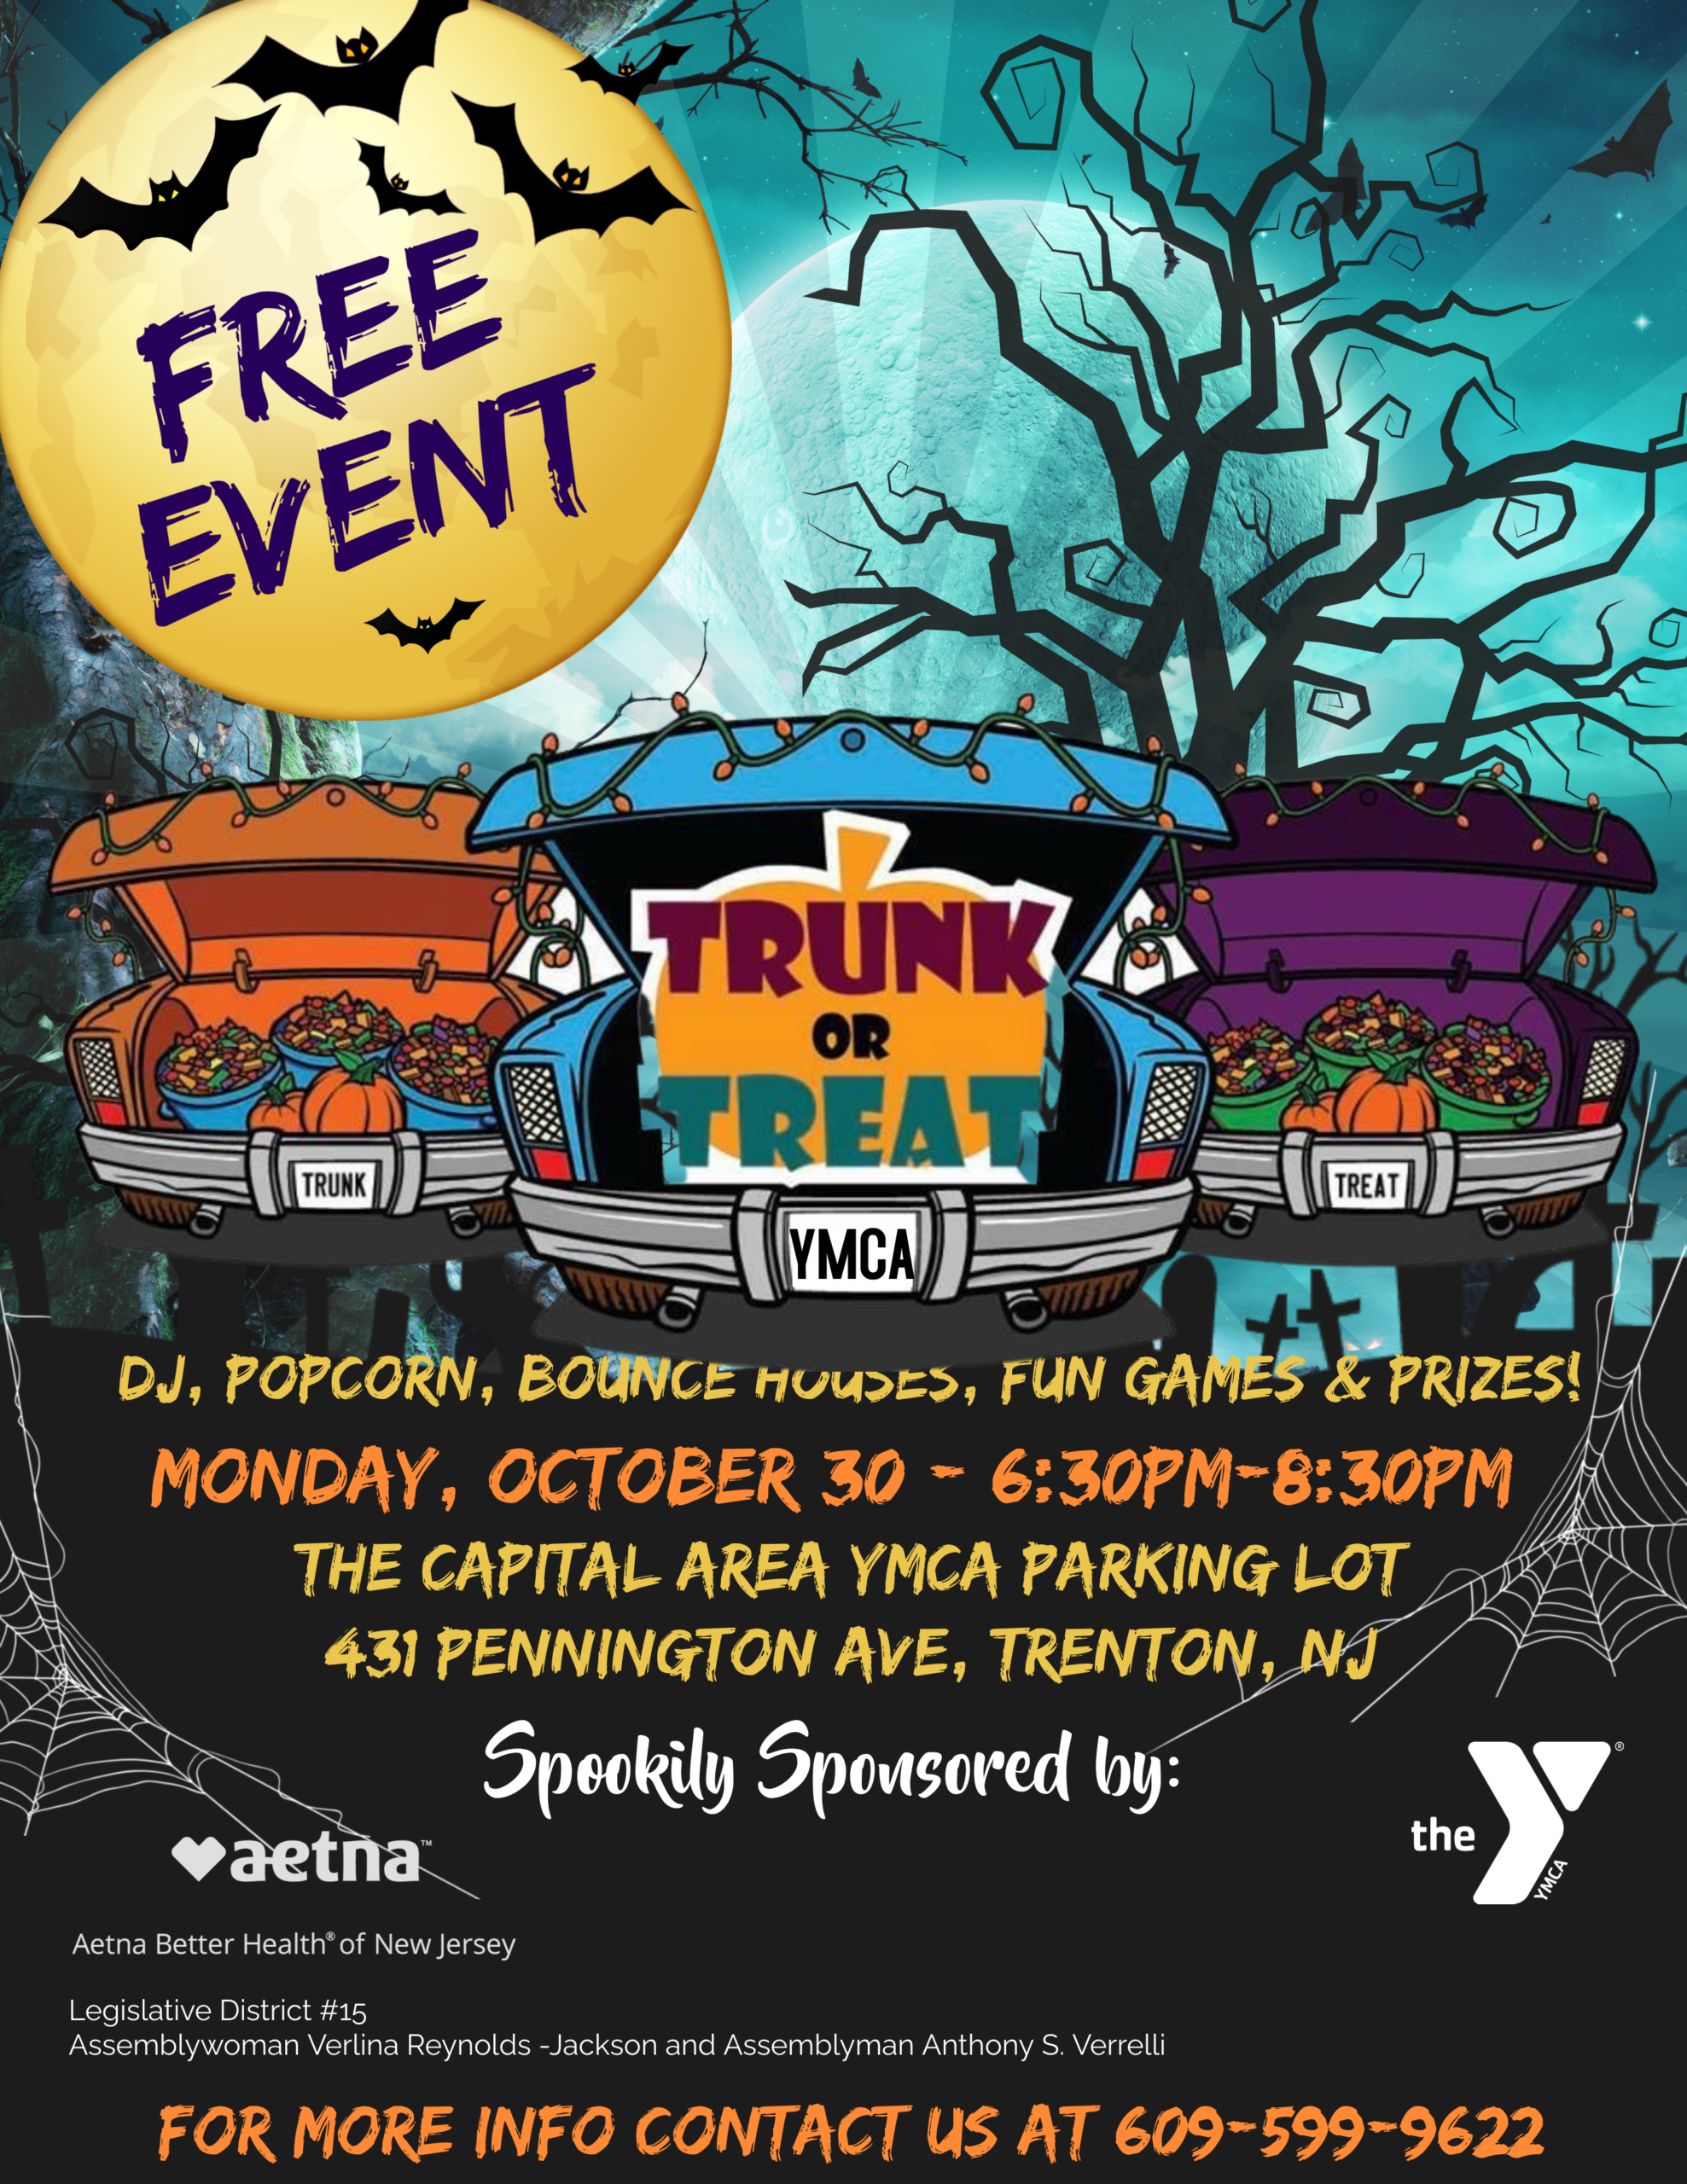 https://capitalymca.org/wp-content/uploads/2022/10/2023-Halloween-Trunk-or-Treat-1-1-scaled.jpg